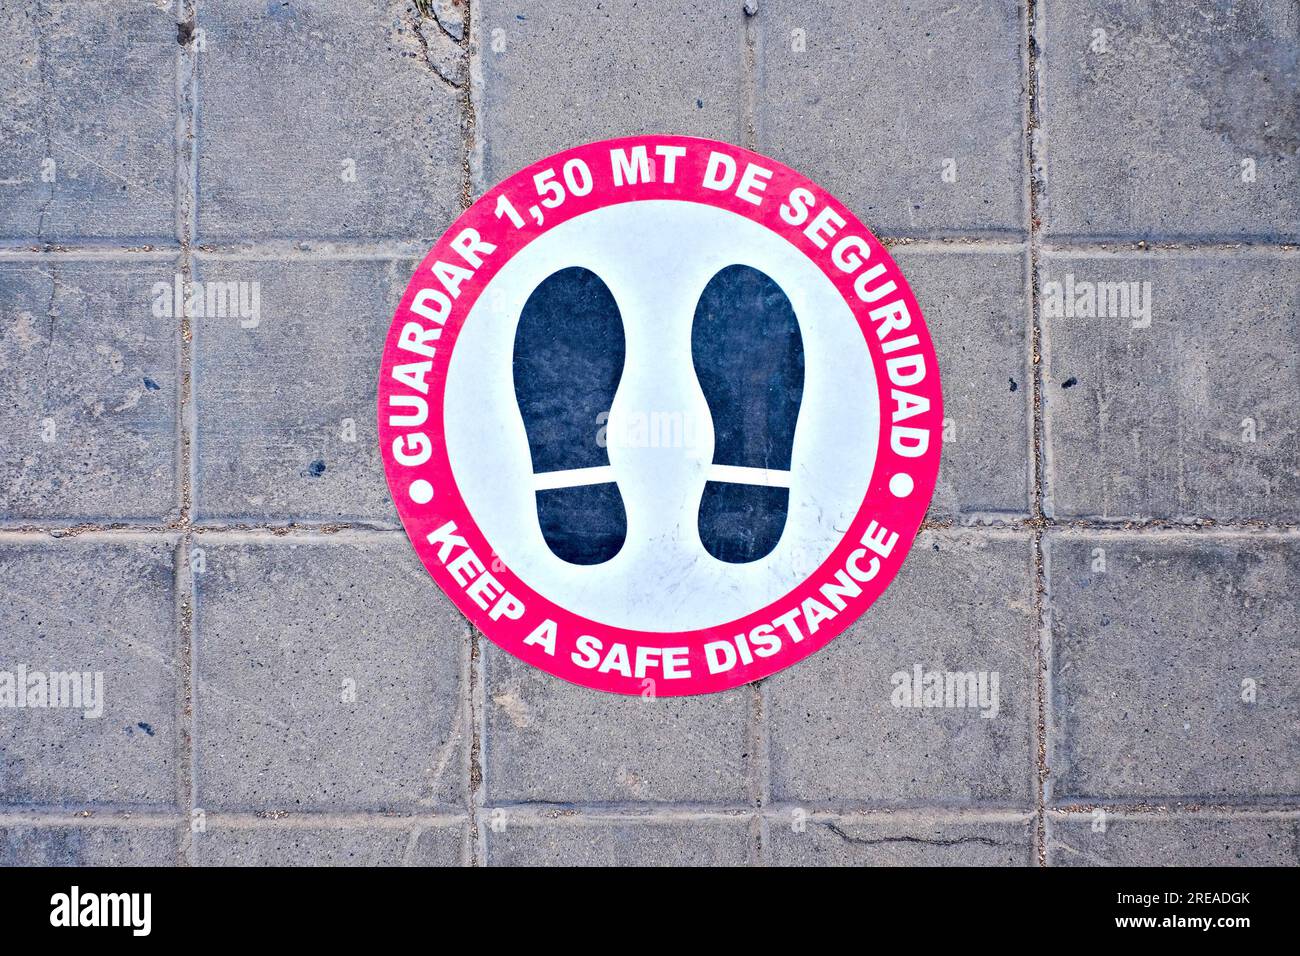 Covid-19 safe distance sign in Spanish and English (Spanish text: guardar 1.5m de seguridad, English translation: keep safe distance of 1.5 meter). Stock Photo